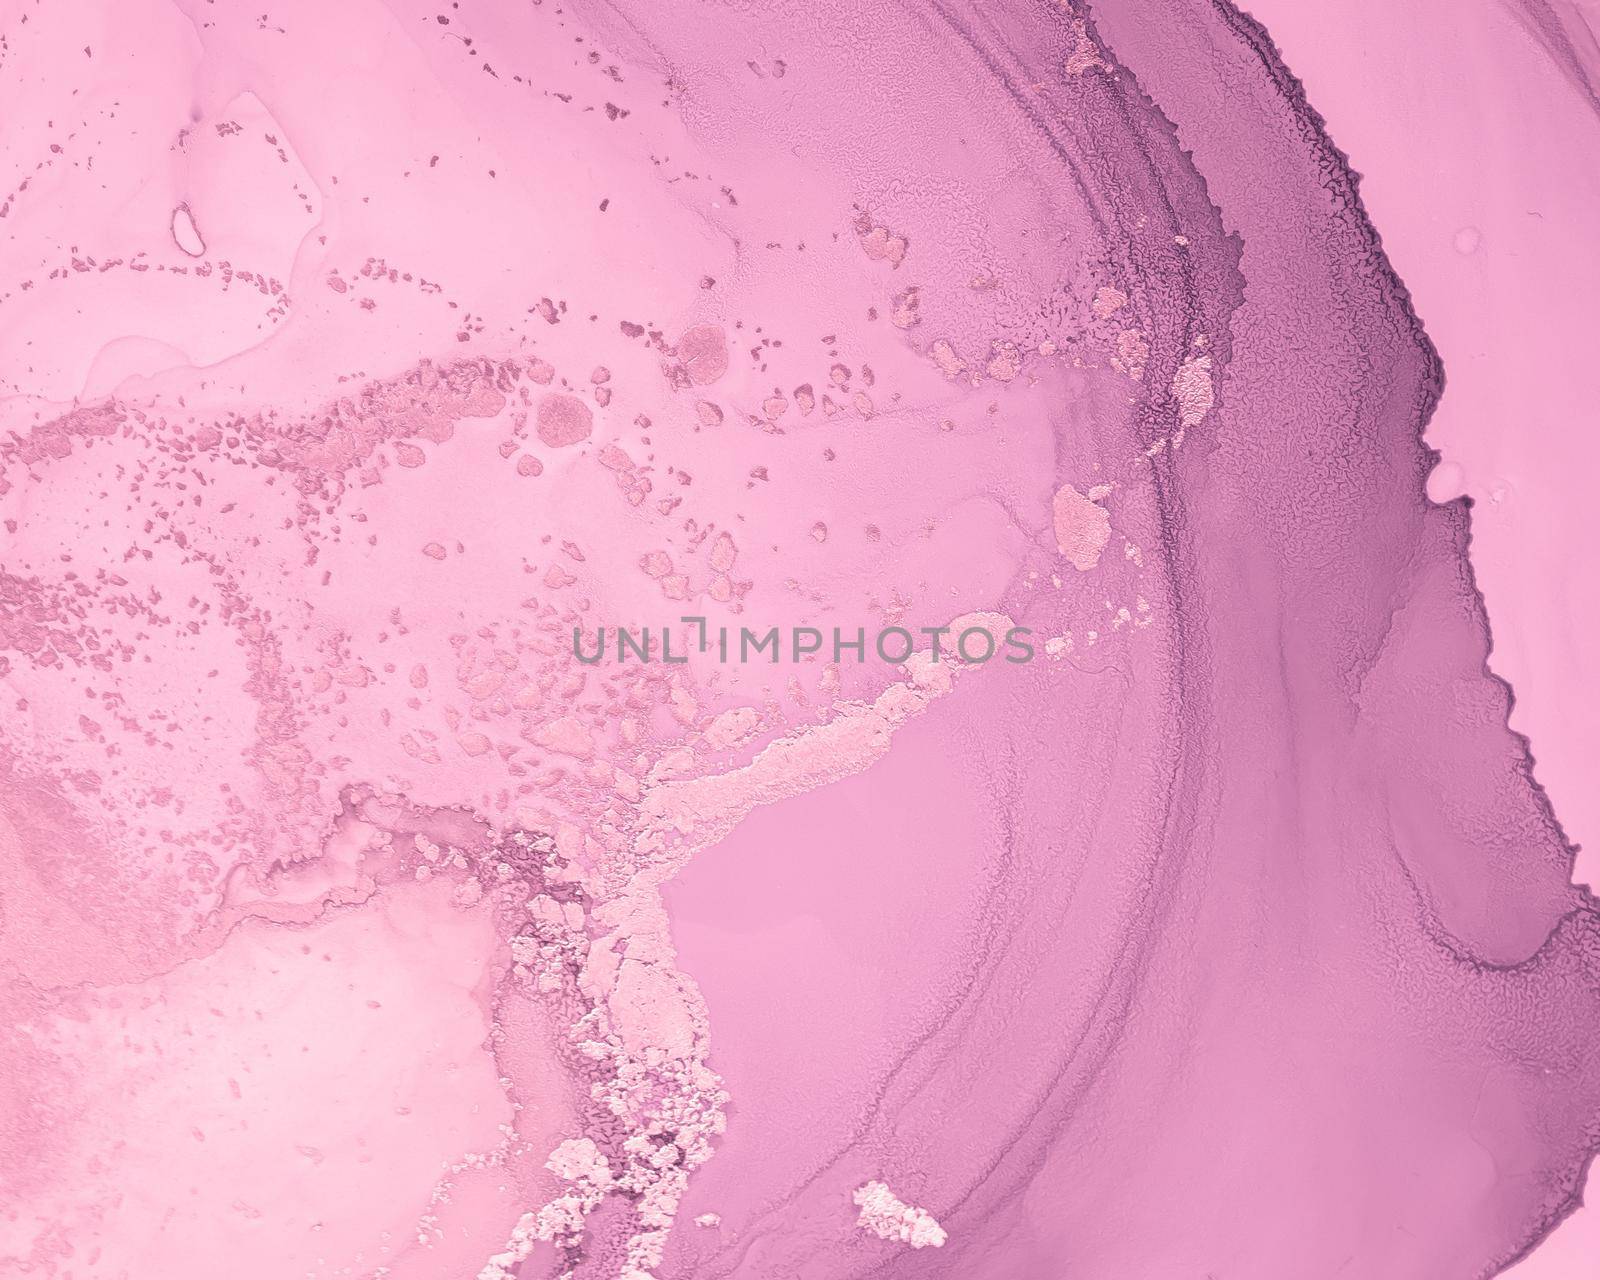 Feminine Luxury Marble. Abstract Mix. Ink Flow Pattern. Acrylic Wall. Delicate Fluid Design. Alcohol Pink Marble. Gentle Wallpaper. Art Modern Effect. Sophisticated Liquid Marble.